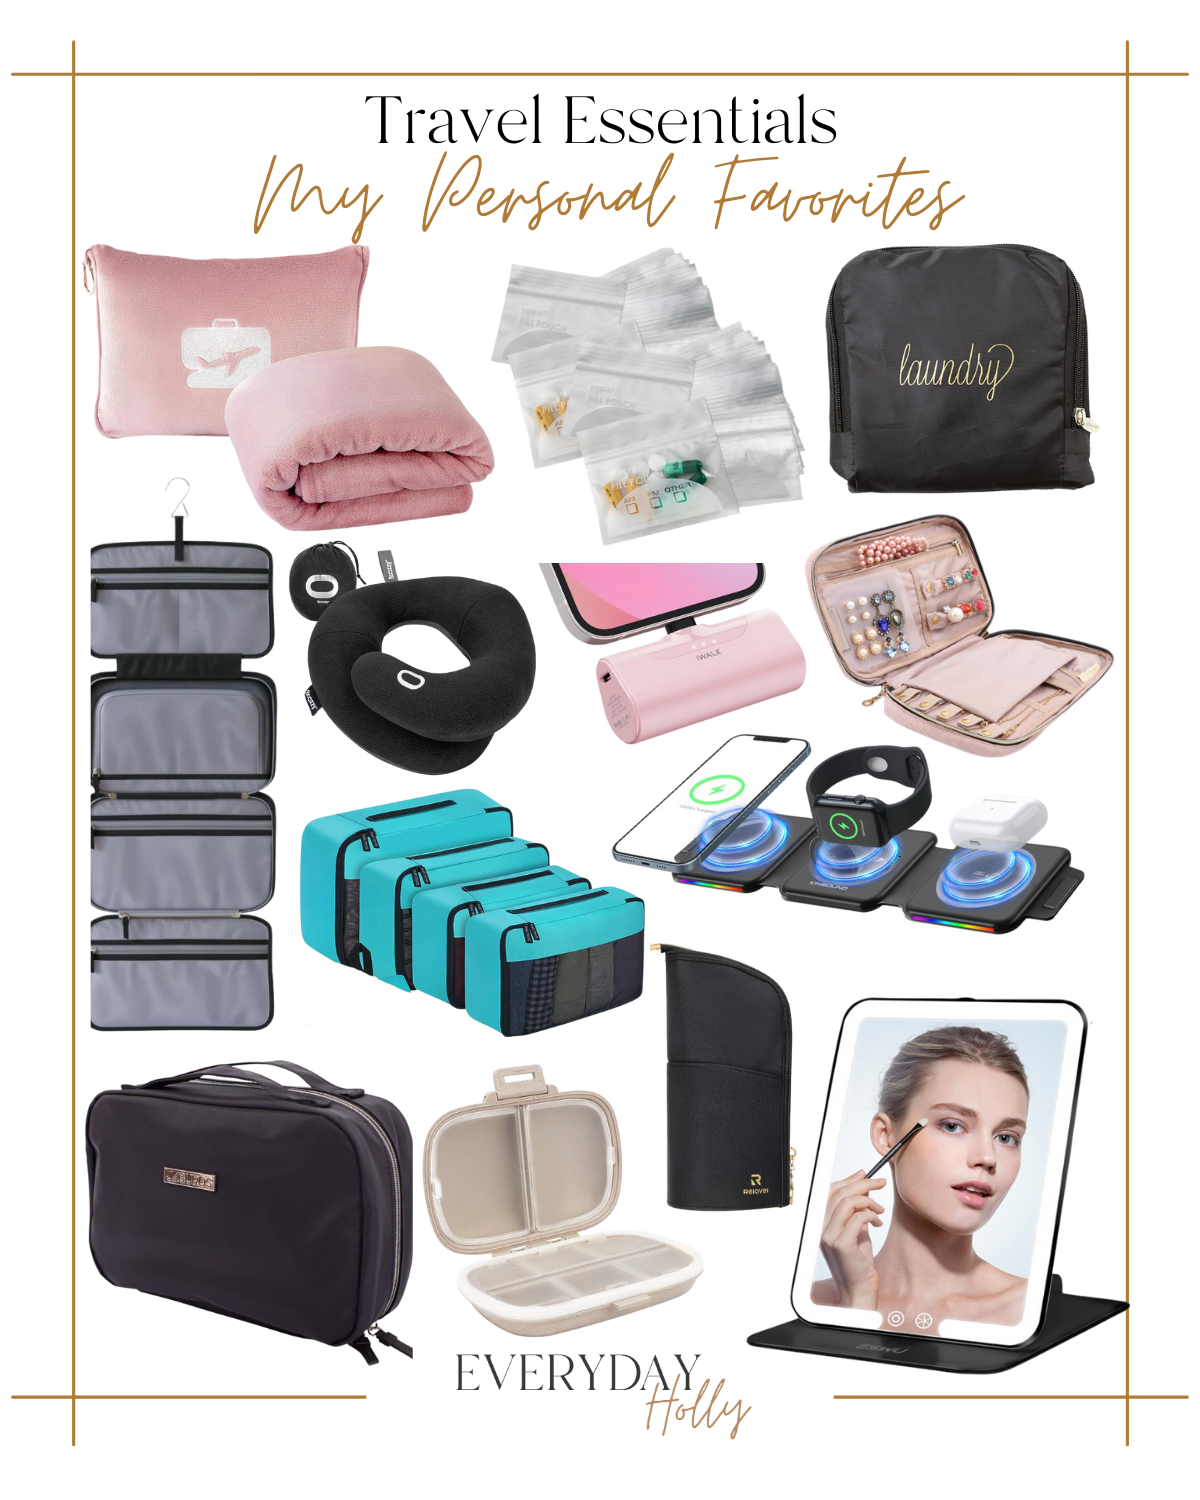 The Best Styles for Every Occasion + Travel Essentials | #best #styles #every #occasion #travel #essentials #mirror #makeup #jewelry #organizers #toiletriesbag #charger #neckpillow #blanket #laundry #pillpouch